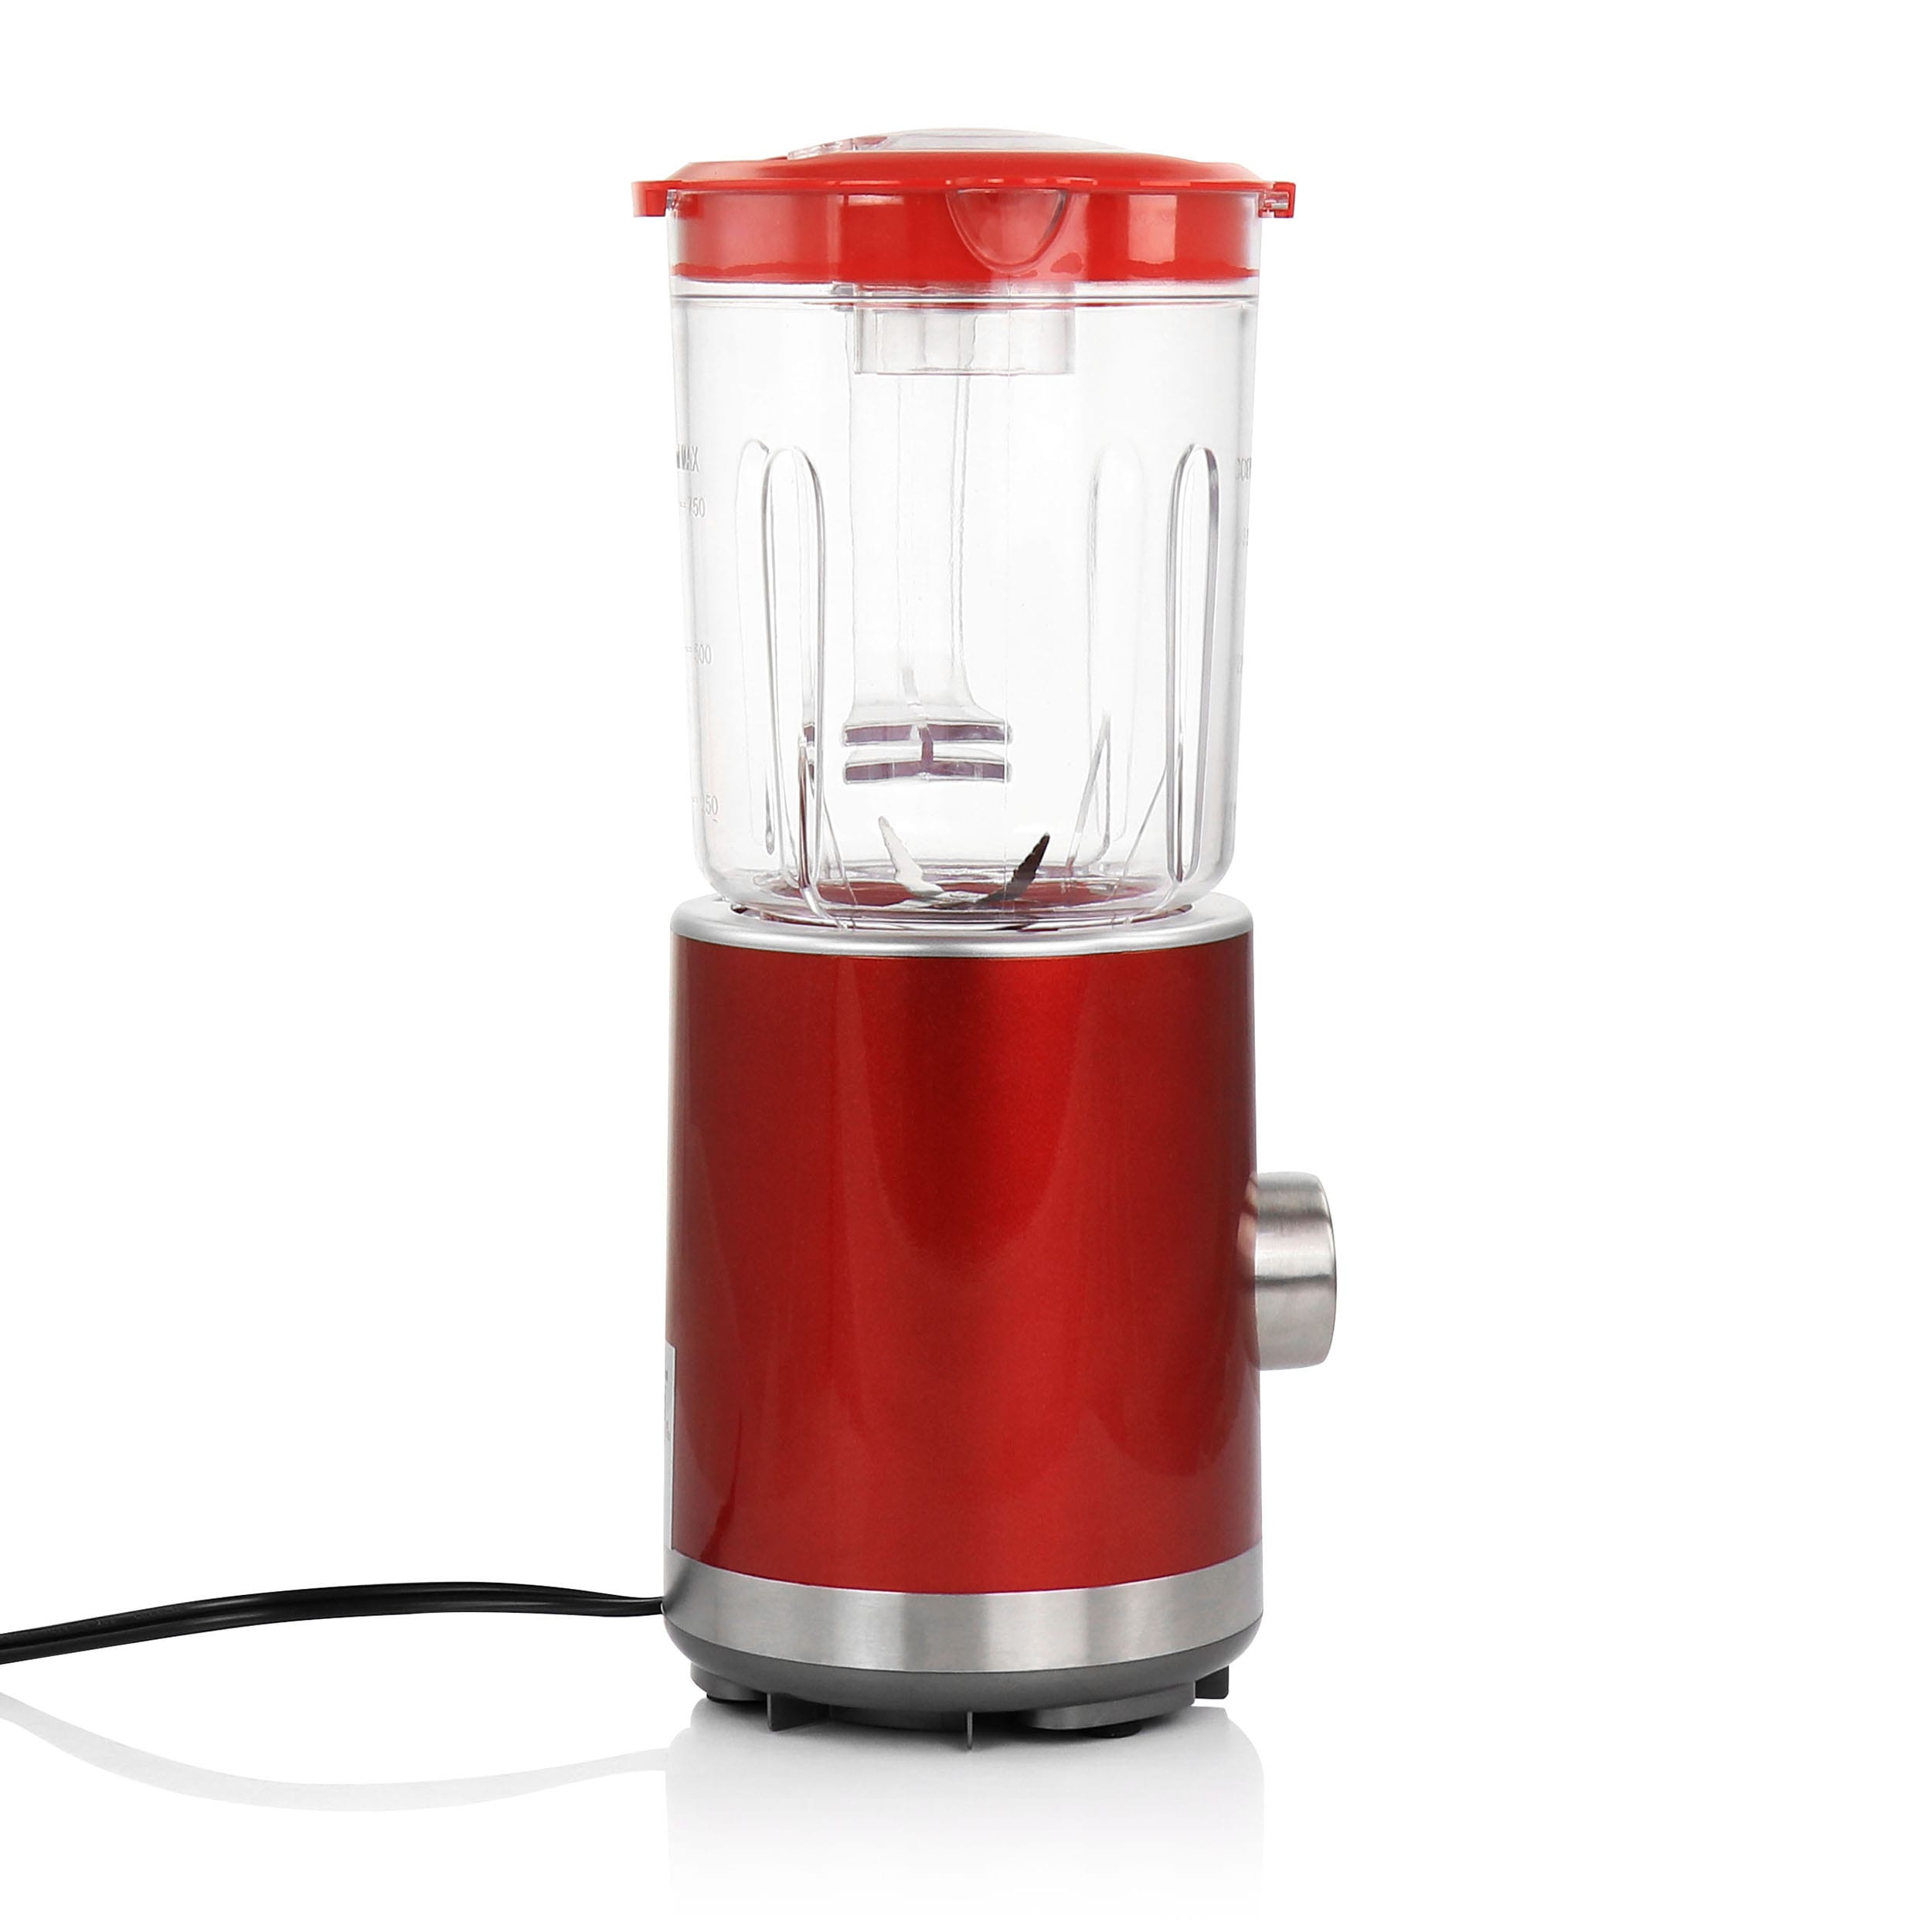 Tribest Personal Blender 2 24-oz Red, White, and Gray 200-Watt